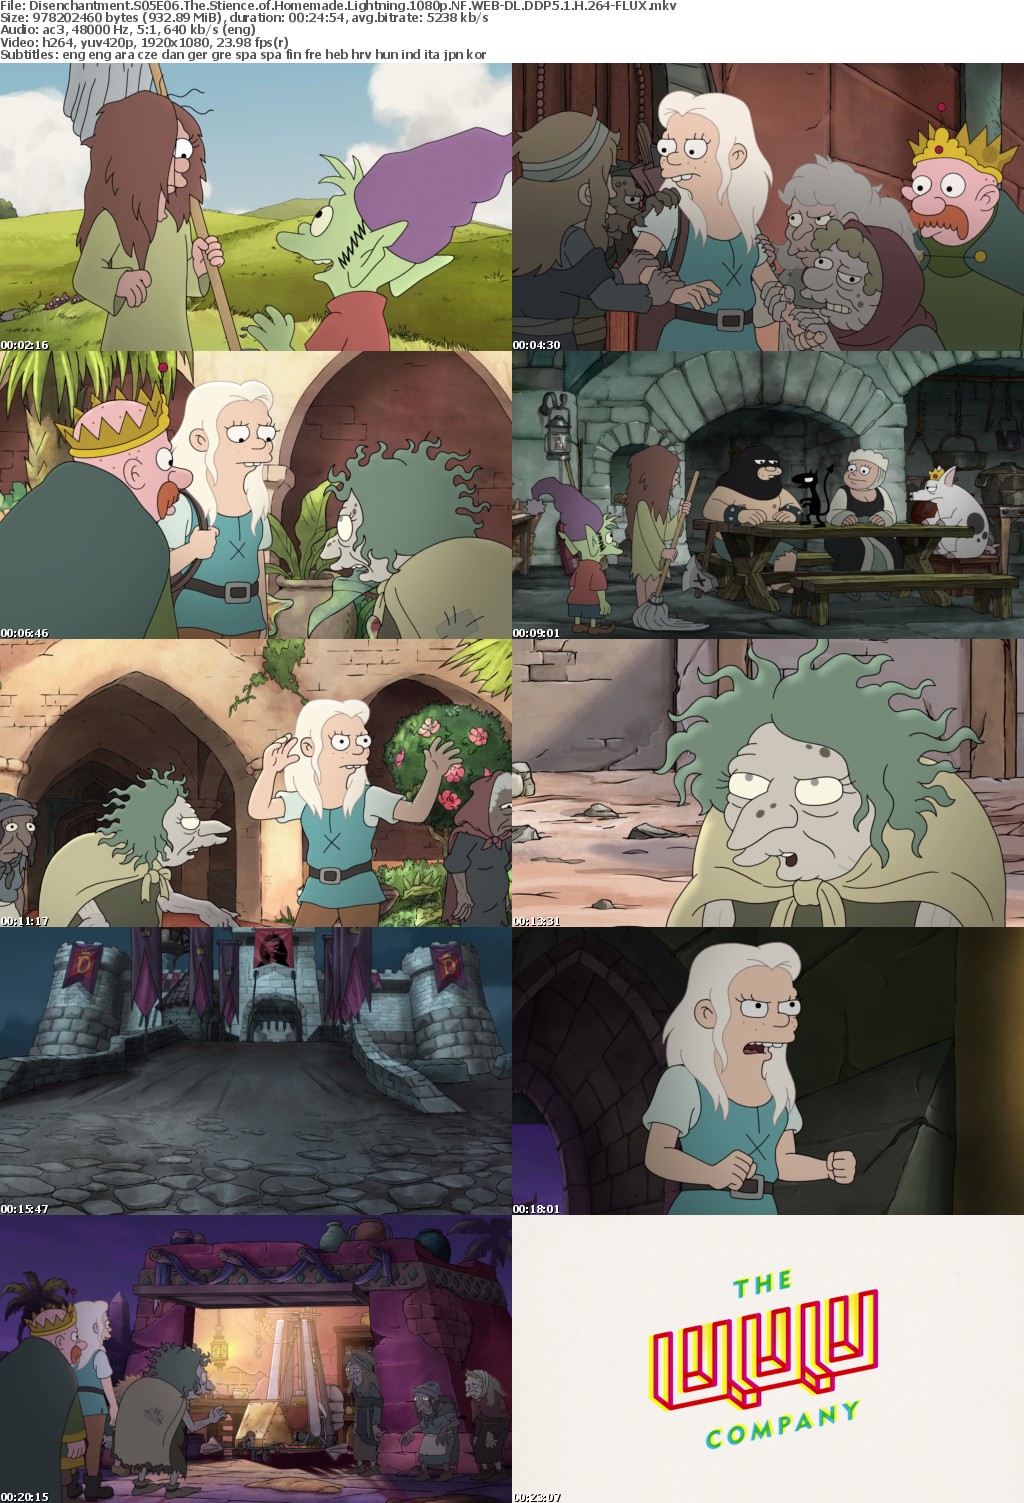 Disenchantment S05E06 The Stience of Homemade Lightning 1080p NF WEB-DL DDP5 1 H 264-FLUX